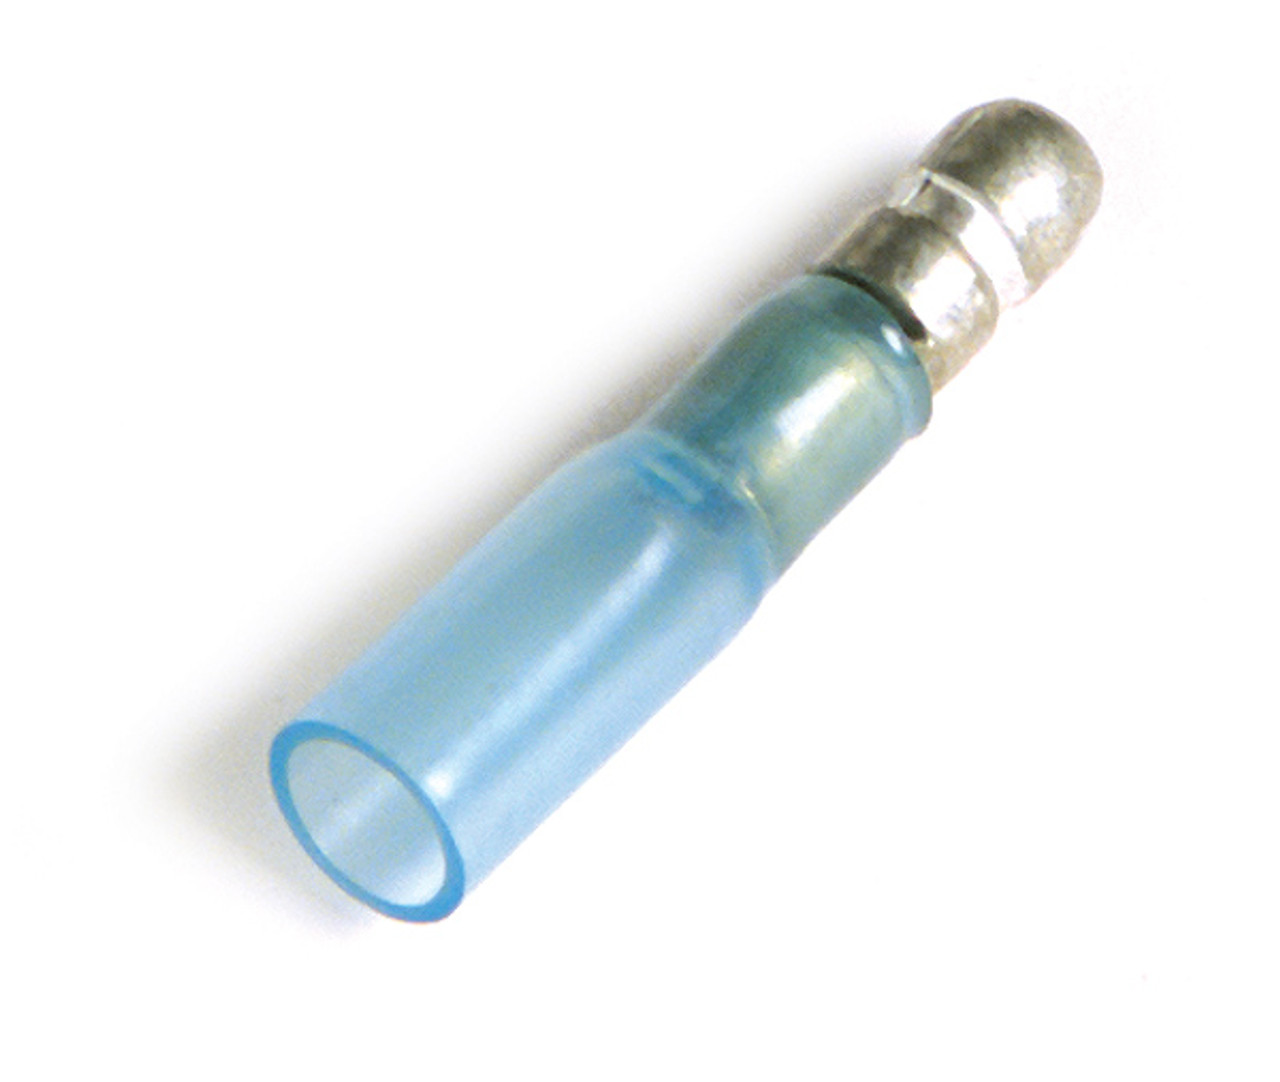 16 - 14 AWG Heat Shrinkable Bullet & Receptacle Connectors Male .197" @ 50 Pack - Blue  83-2434